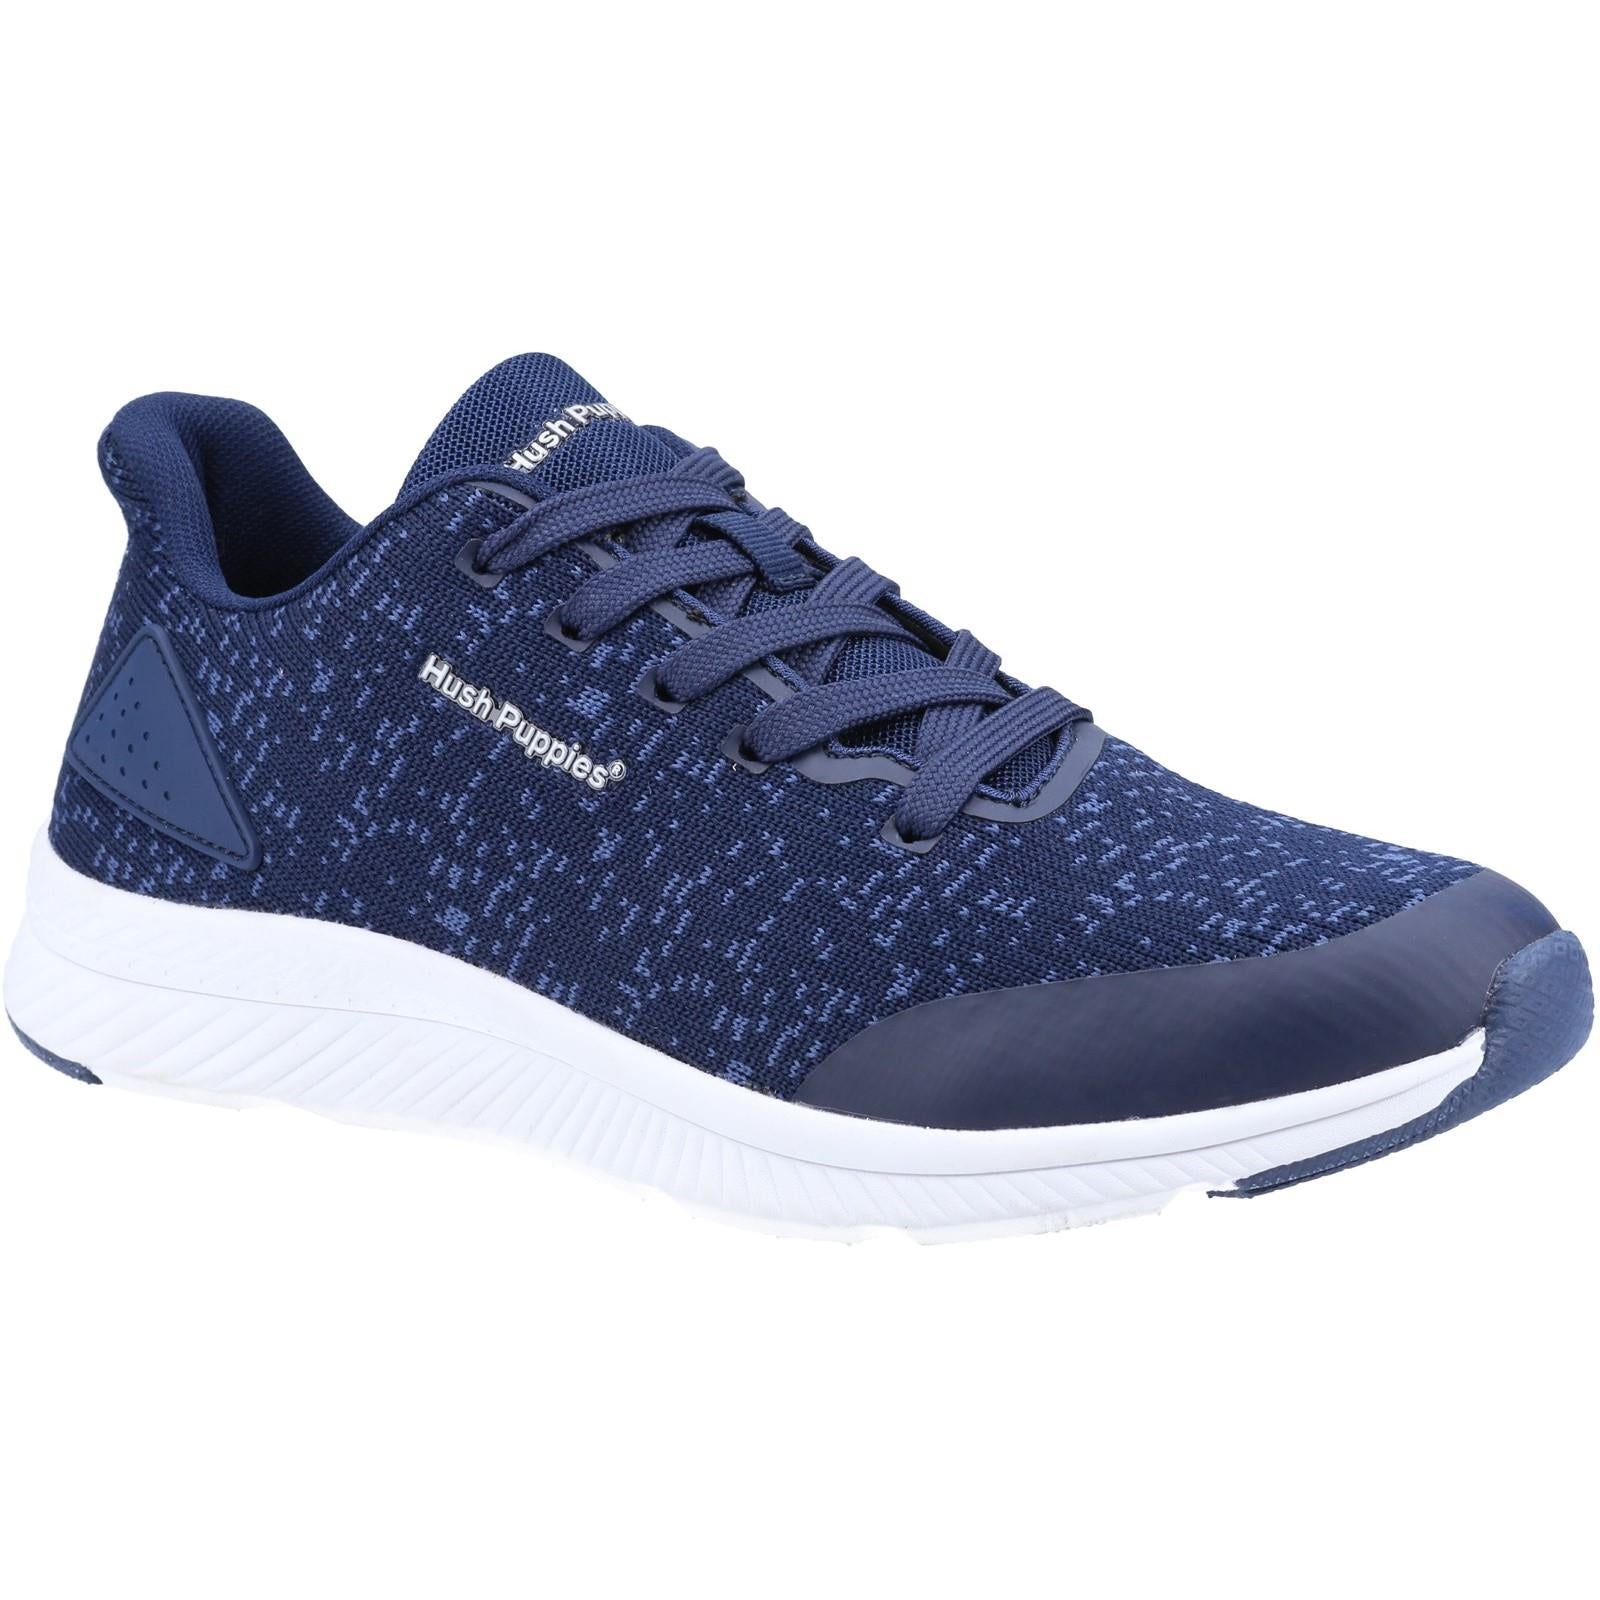 Hush Puppies Jason navy blue knit lightweight memory foam lace up trainers shoes